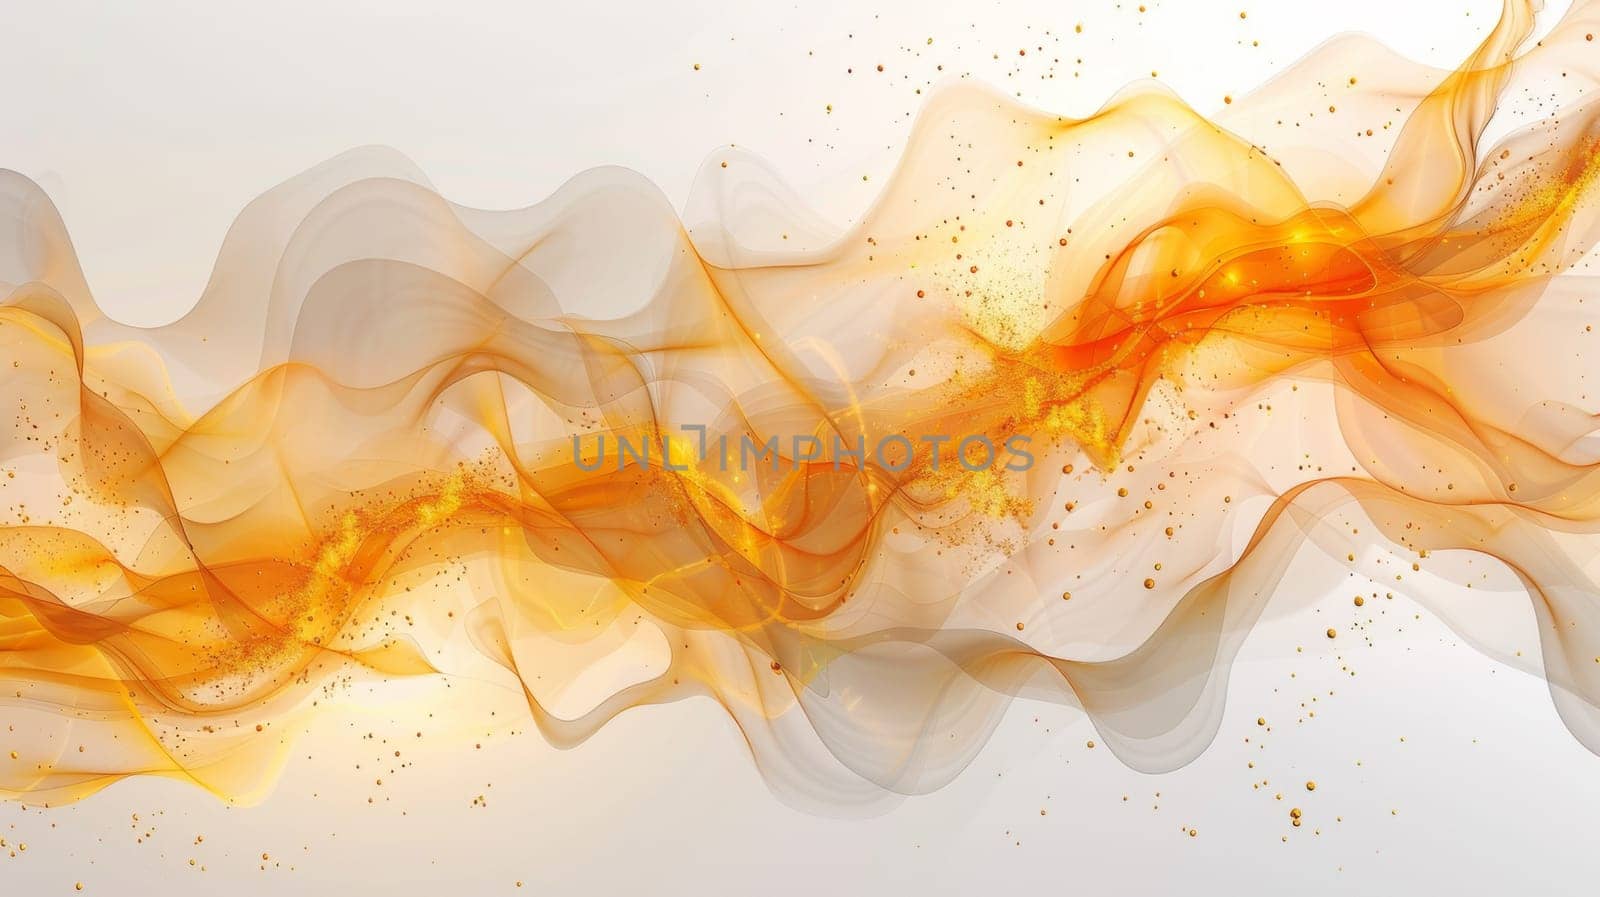 A close up of a yellow and orange colored abstract design